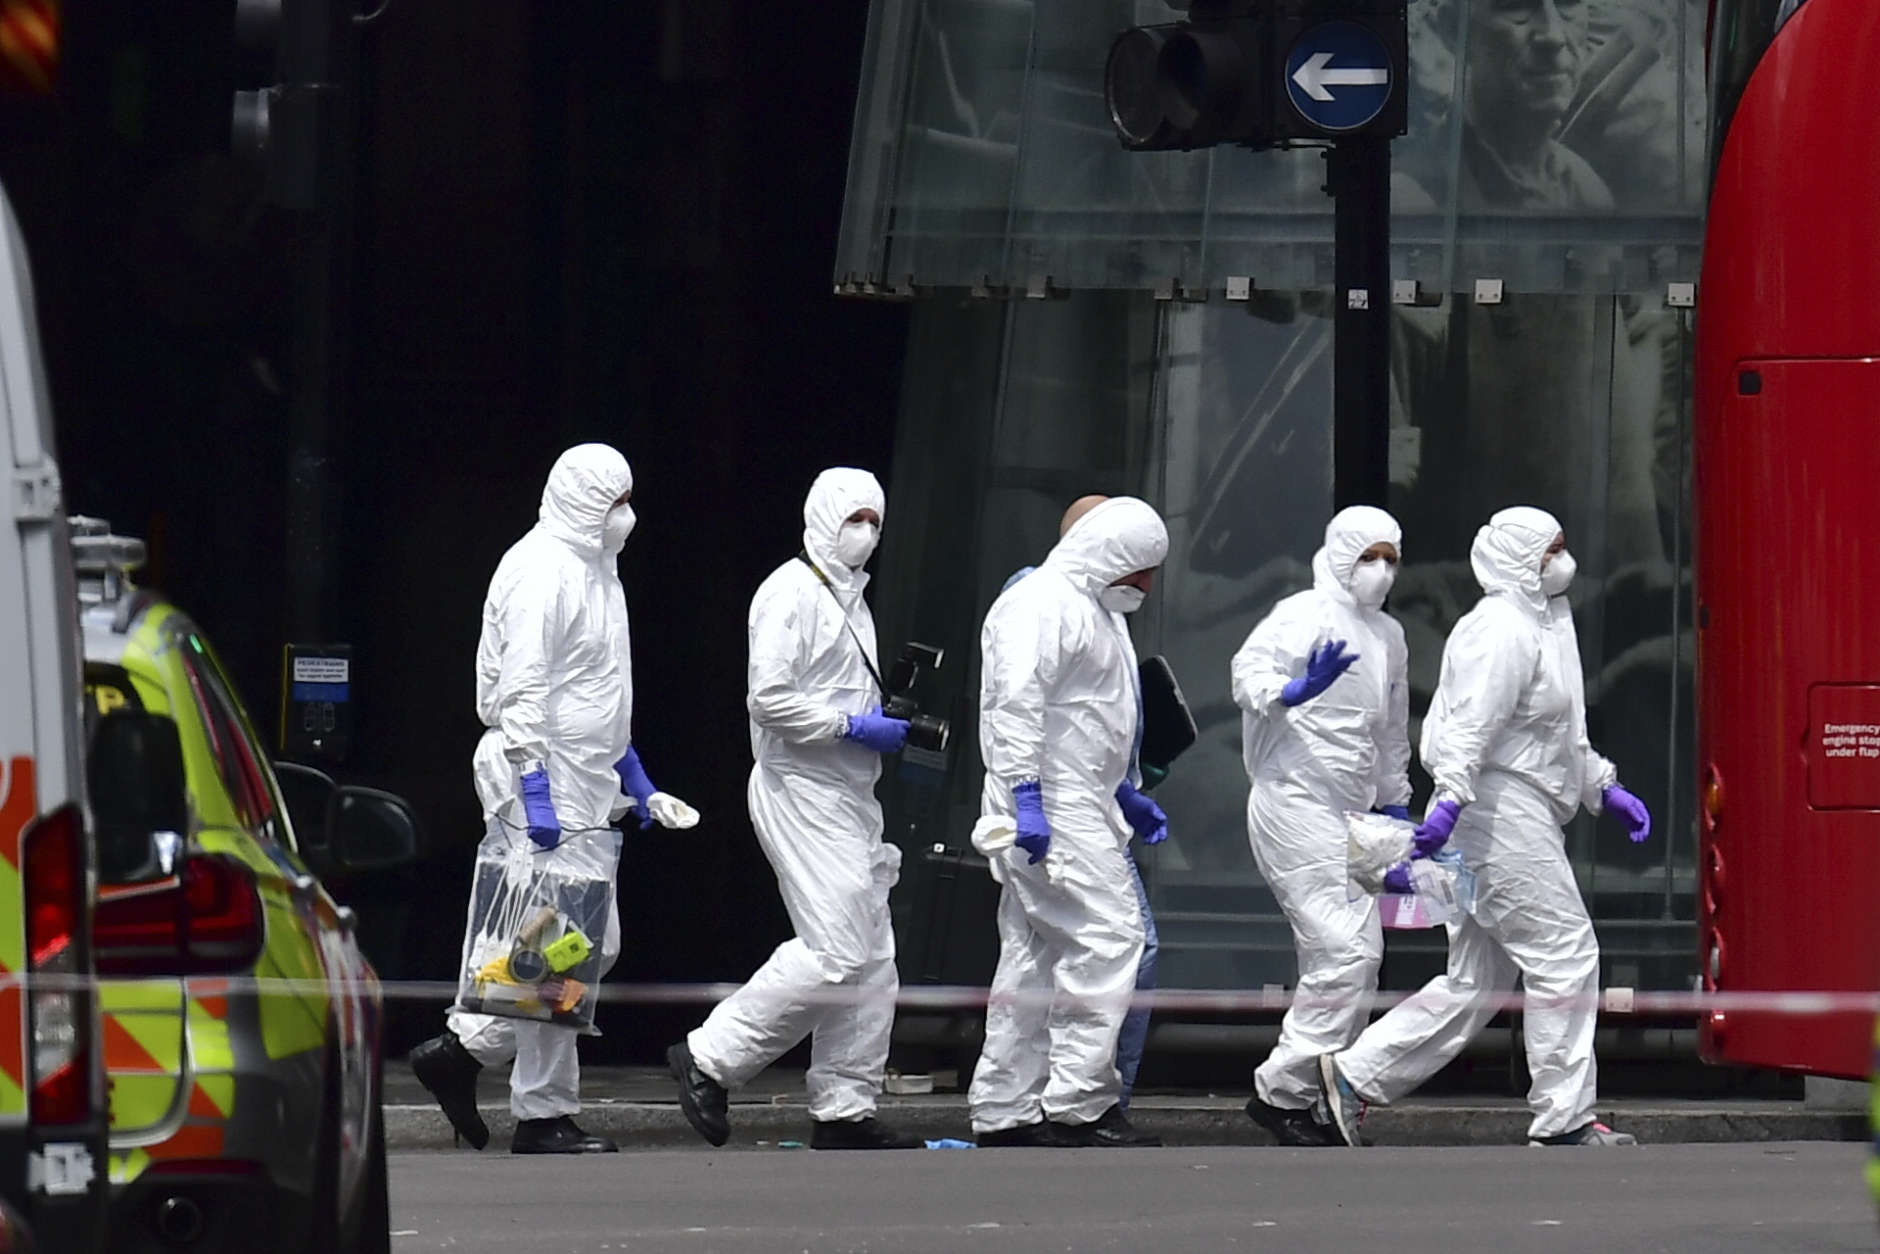 Police forensic officers outside Borough Market, London, Sunday June 4, 2017, near the scene of Saturday night's terrorist incident. Several people were killed in the incident and emergency officials said dozens were treated at London hospitals and a number of others suffered less serious injuries. (Dominic Lipinski/PA via AP)